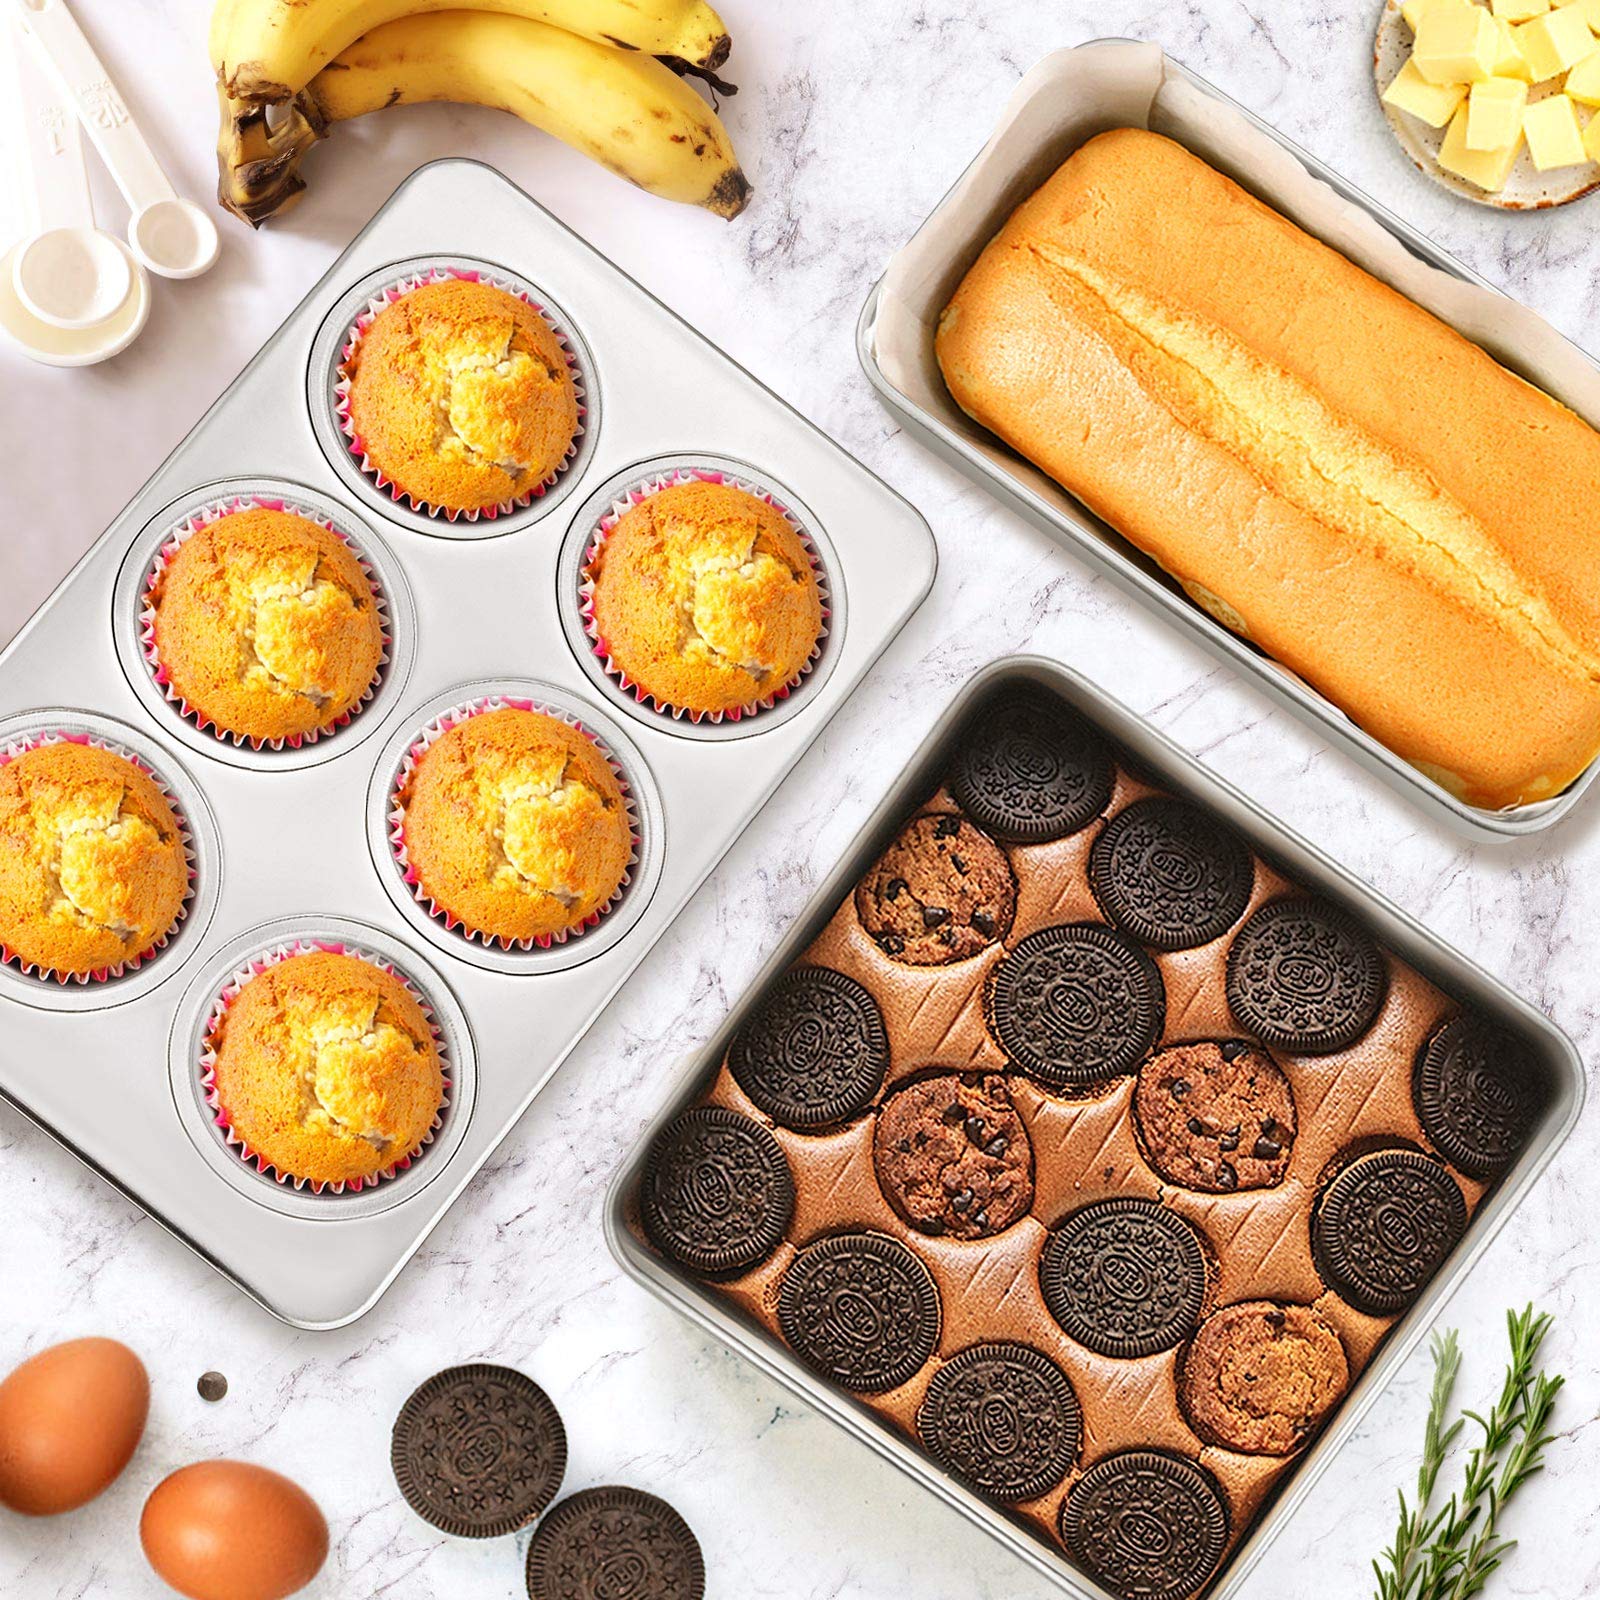 Stainless Steel Bakeware Set, E-far Metal Baking Pan Set of 9, Include Round/Square Cake Pans, Rectangle Baking Pan with Lid, Loaf Pan, Muffin Pan, Cookie Sheet with Rack, Dishwasher Safe